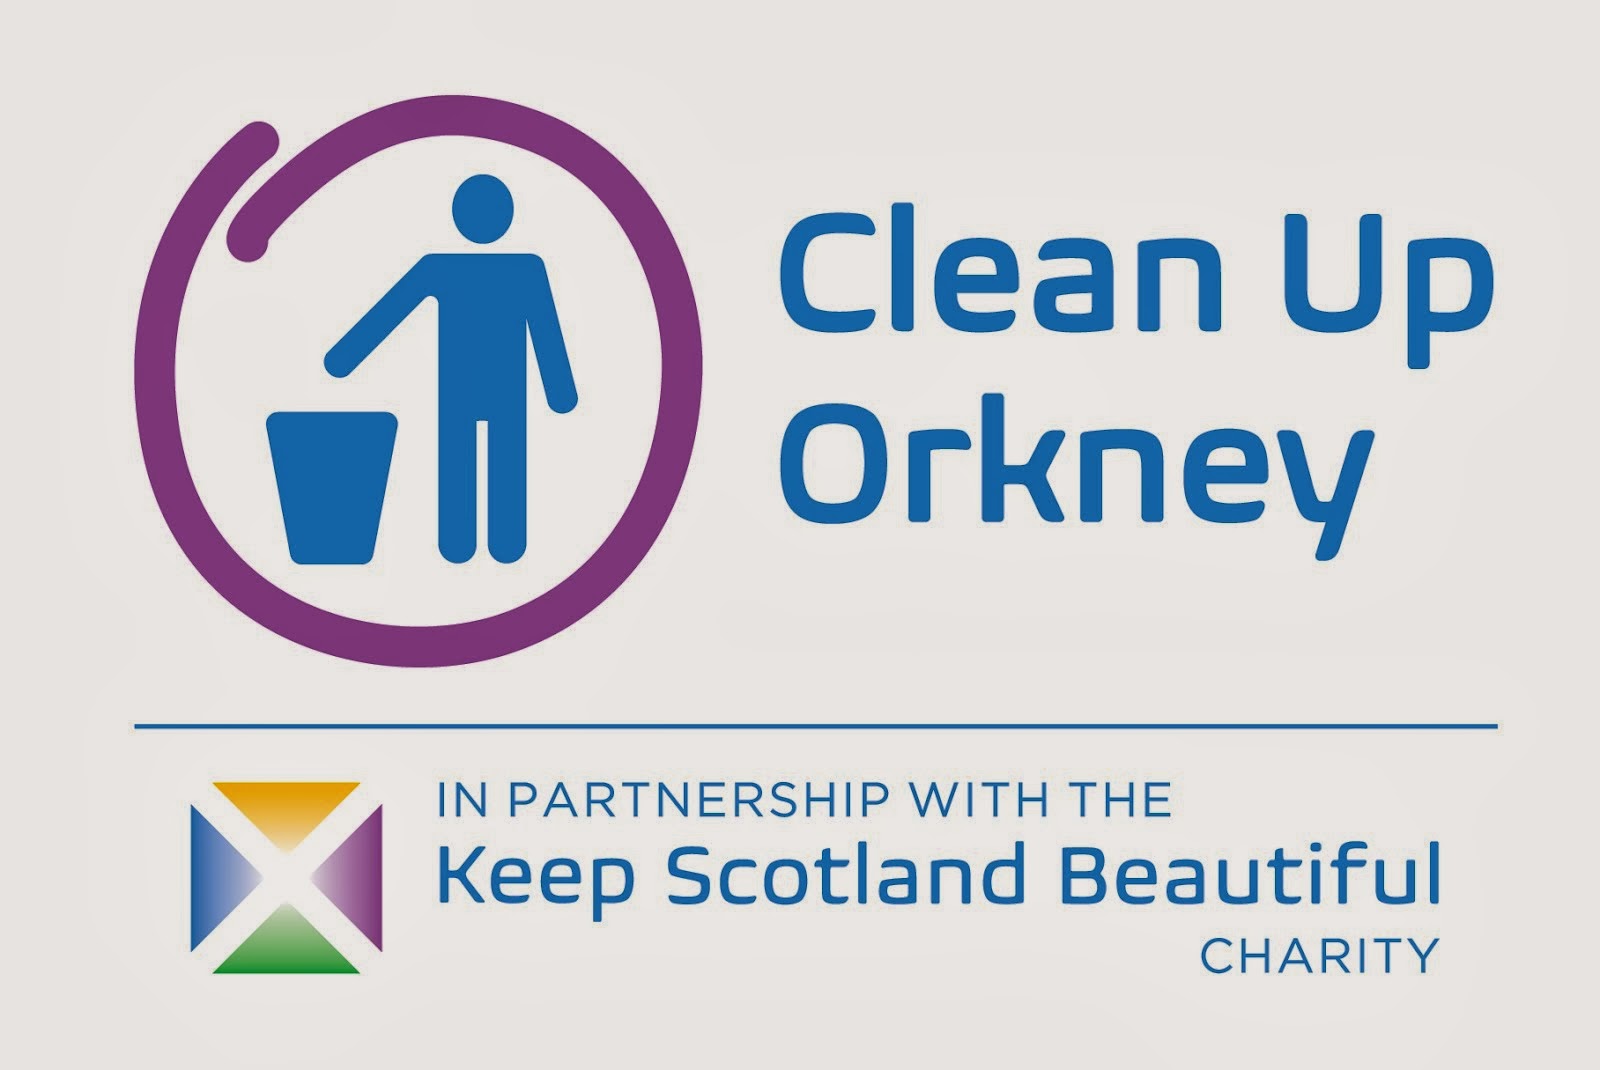 Clean Up Orkney!